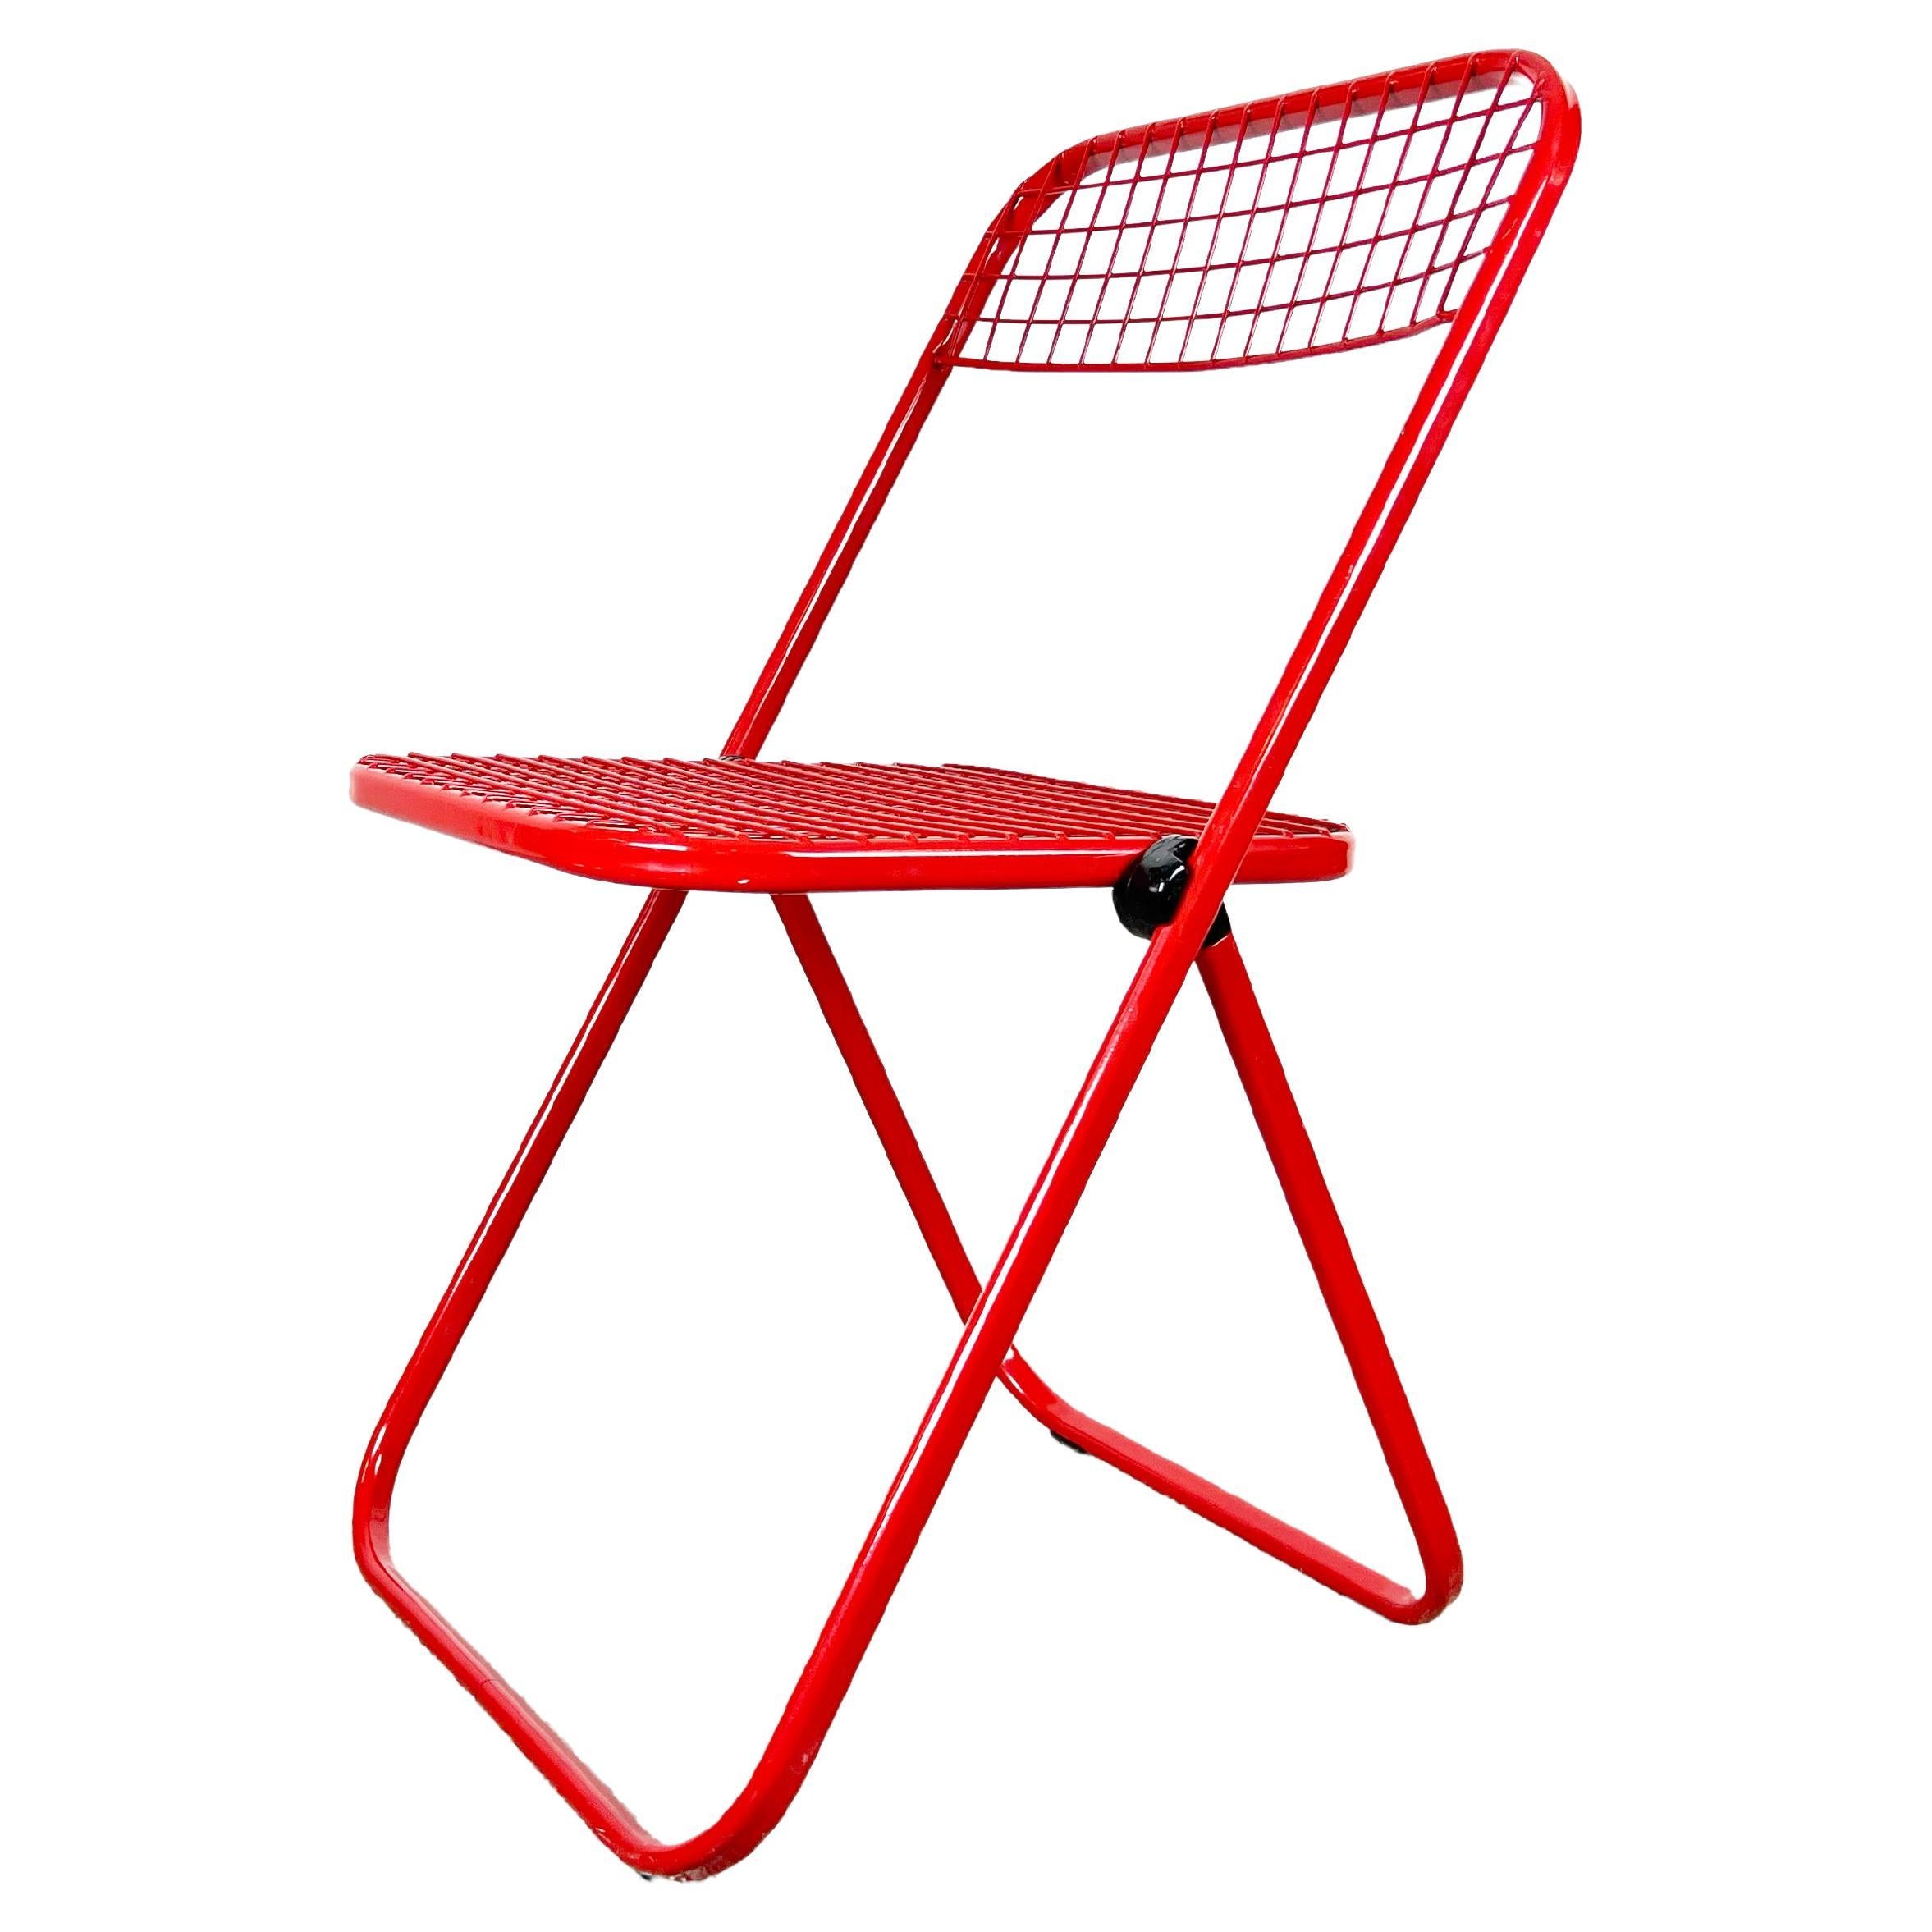 Vintage Red Metal Folding Chair by Talin